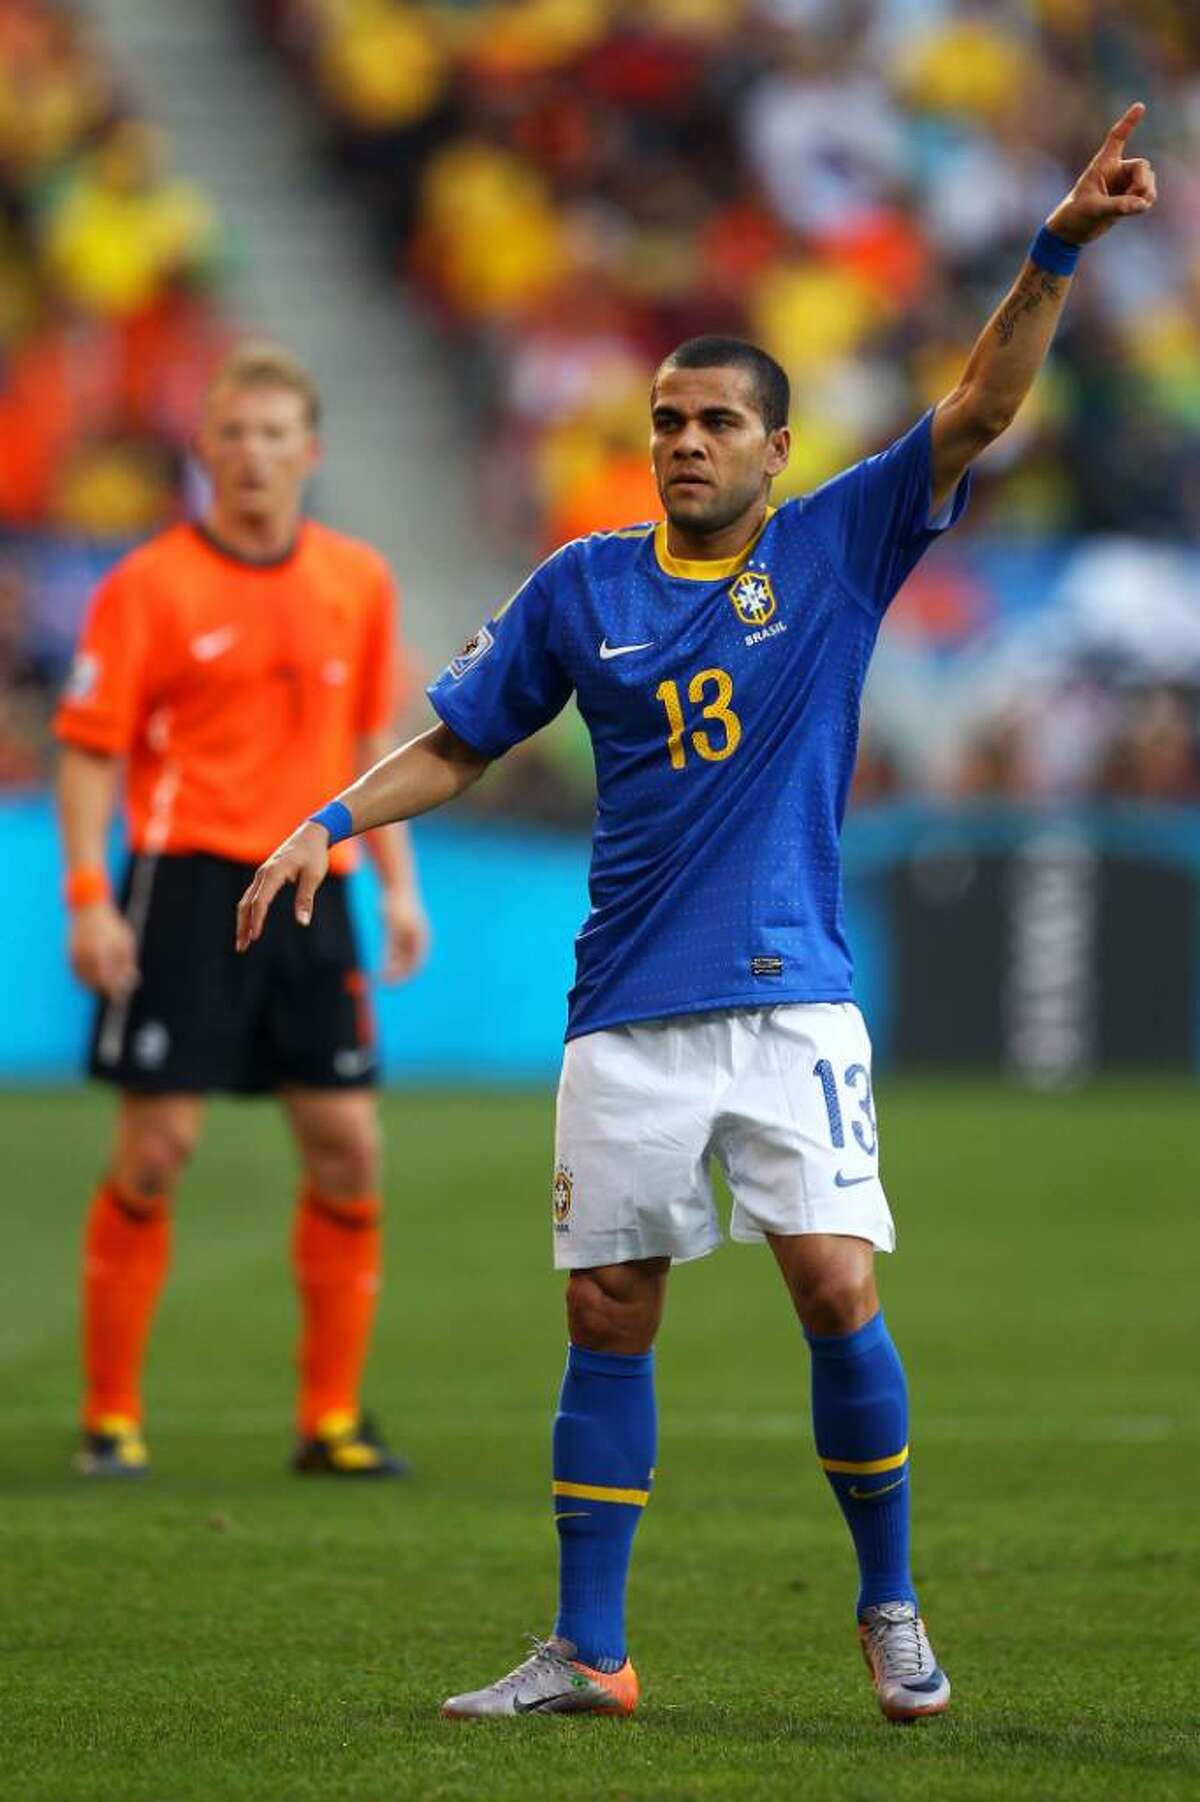 PORT ELIZABETH, SOUTH AFRICA - JULY 02: Dani Alves of Brazil gestures during the 2010 FIFA World Cup South Africa Quarter Final match between Netherlands and Brazil at Nelson Mandela Bay Stadium on July 2, 2010 in Nelson Mandela Bay/Port Elizabeth, South Africa. (Photo by Richard Heathcote/Getty Images) *** Local Caption *** Dani Alves